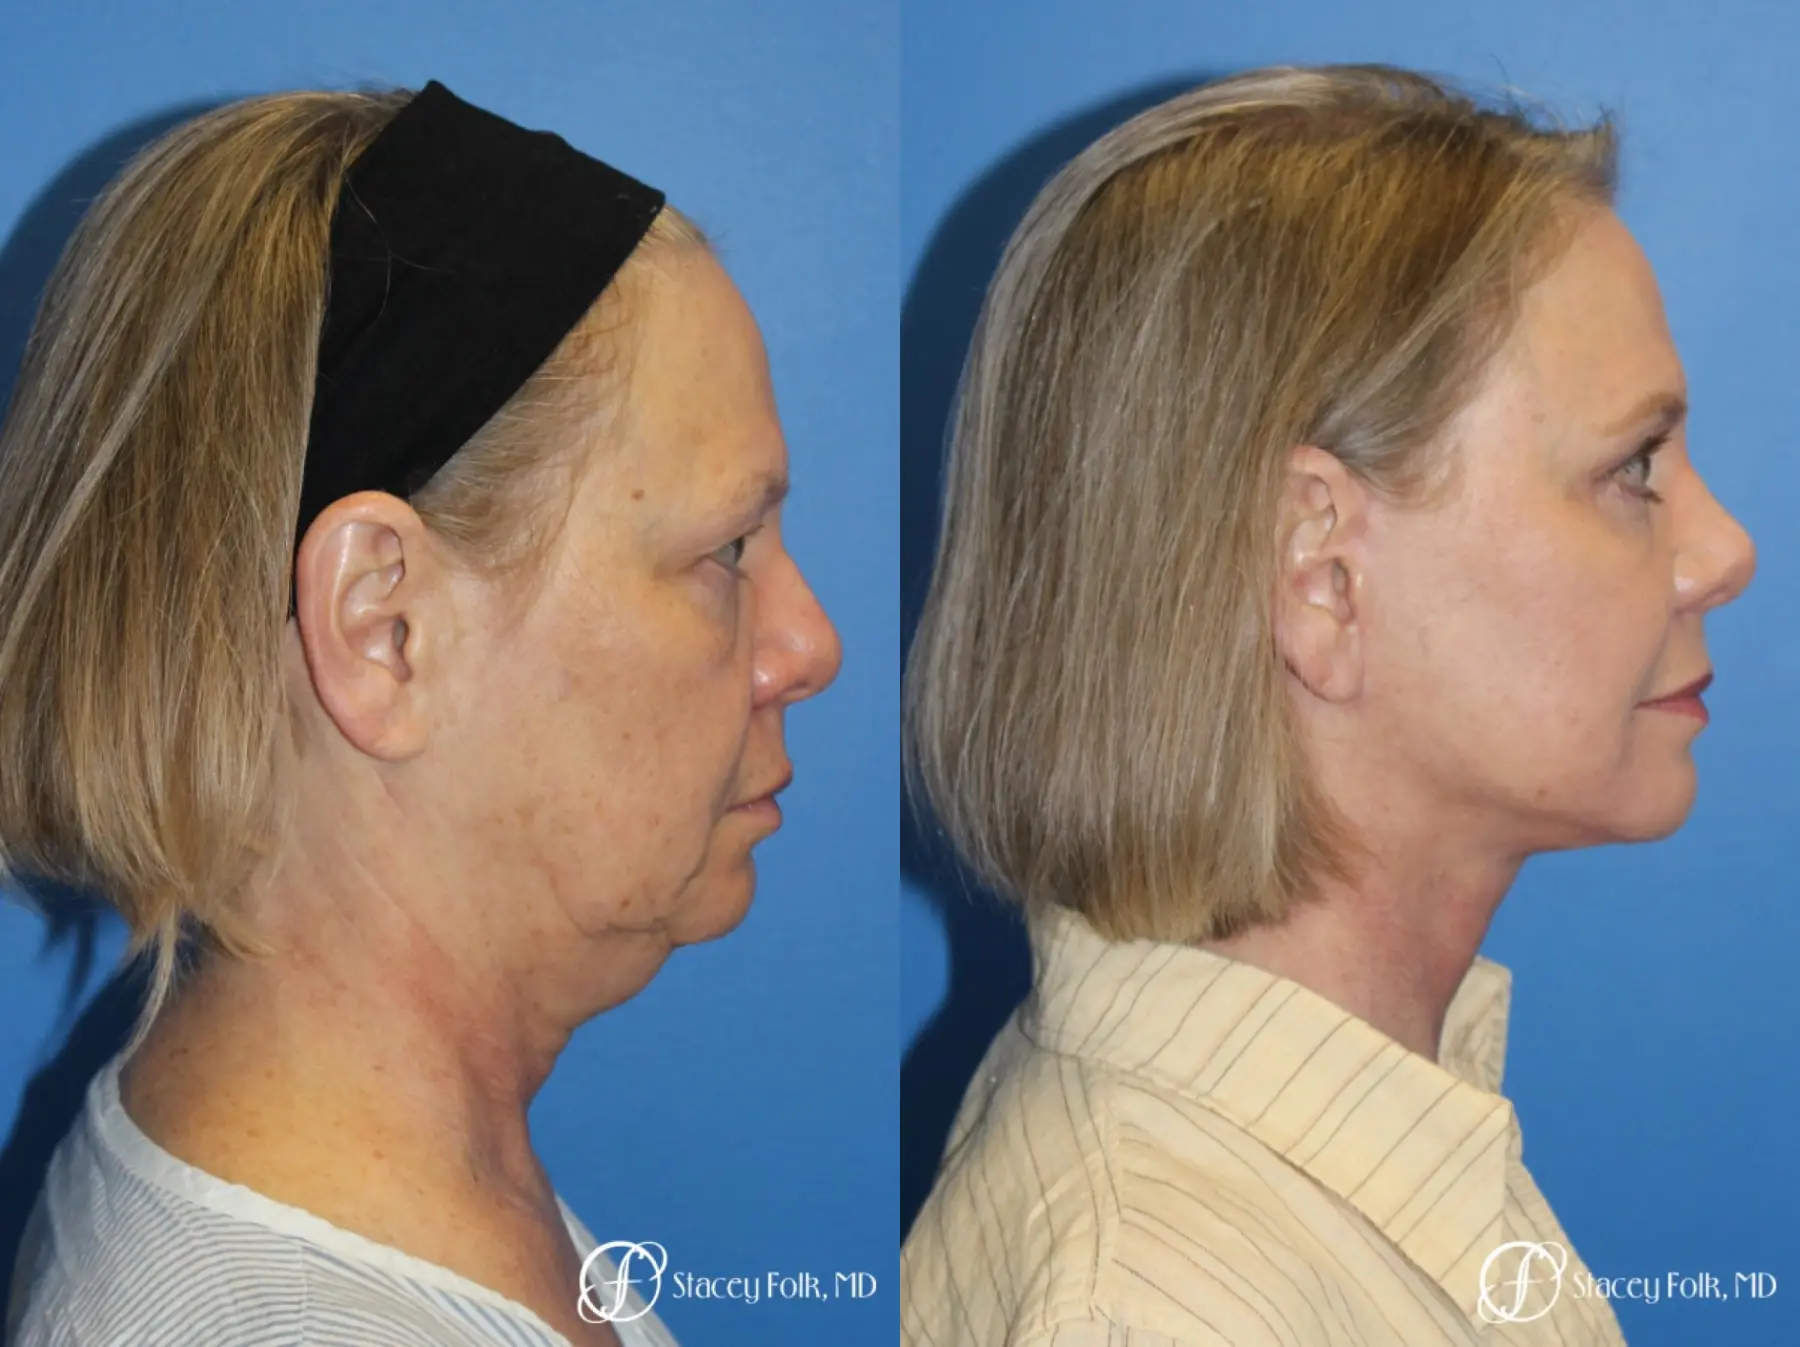 Facial Rejuvenation: Patient 1 - Before and After 3